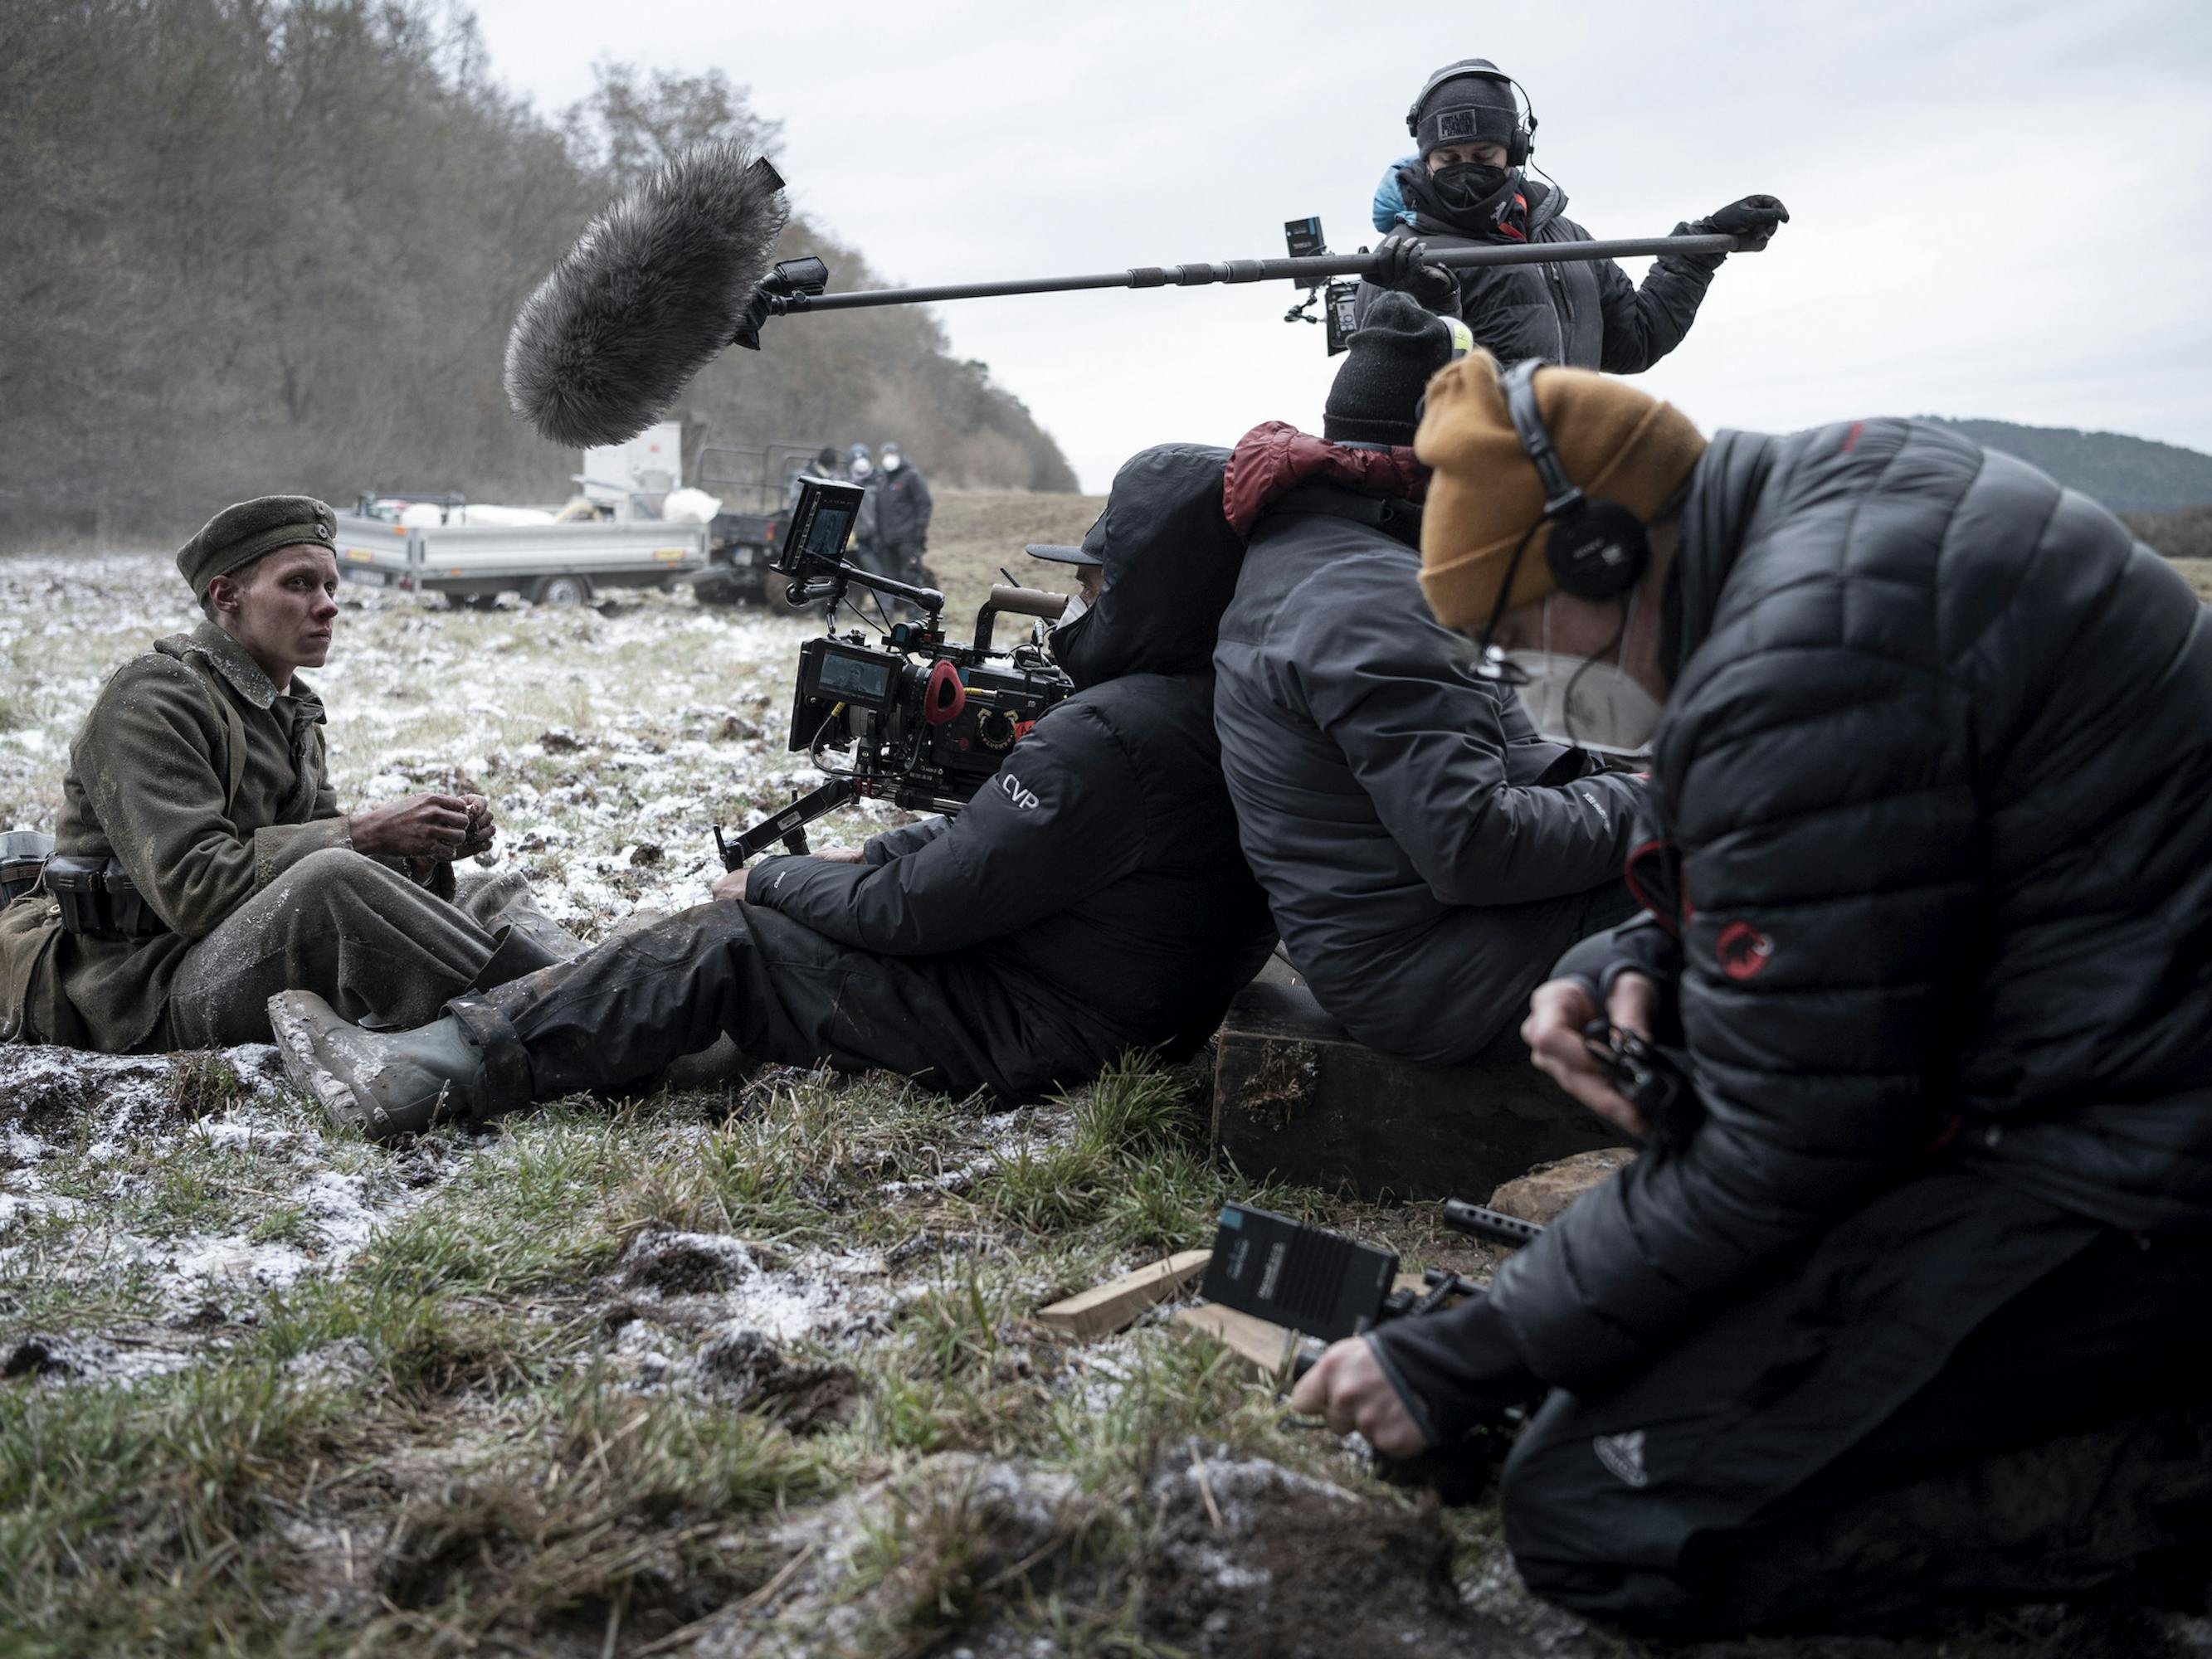 Felix Kammerer and crew behind the scenes. Felix sits on frosty ground, while the crew members wear puffy black jackets and hold equipment.